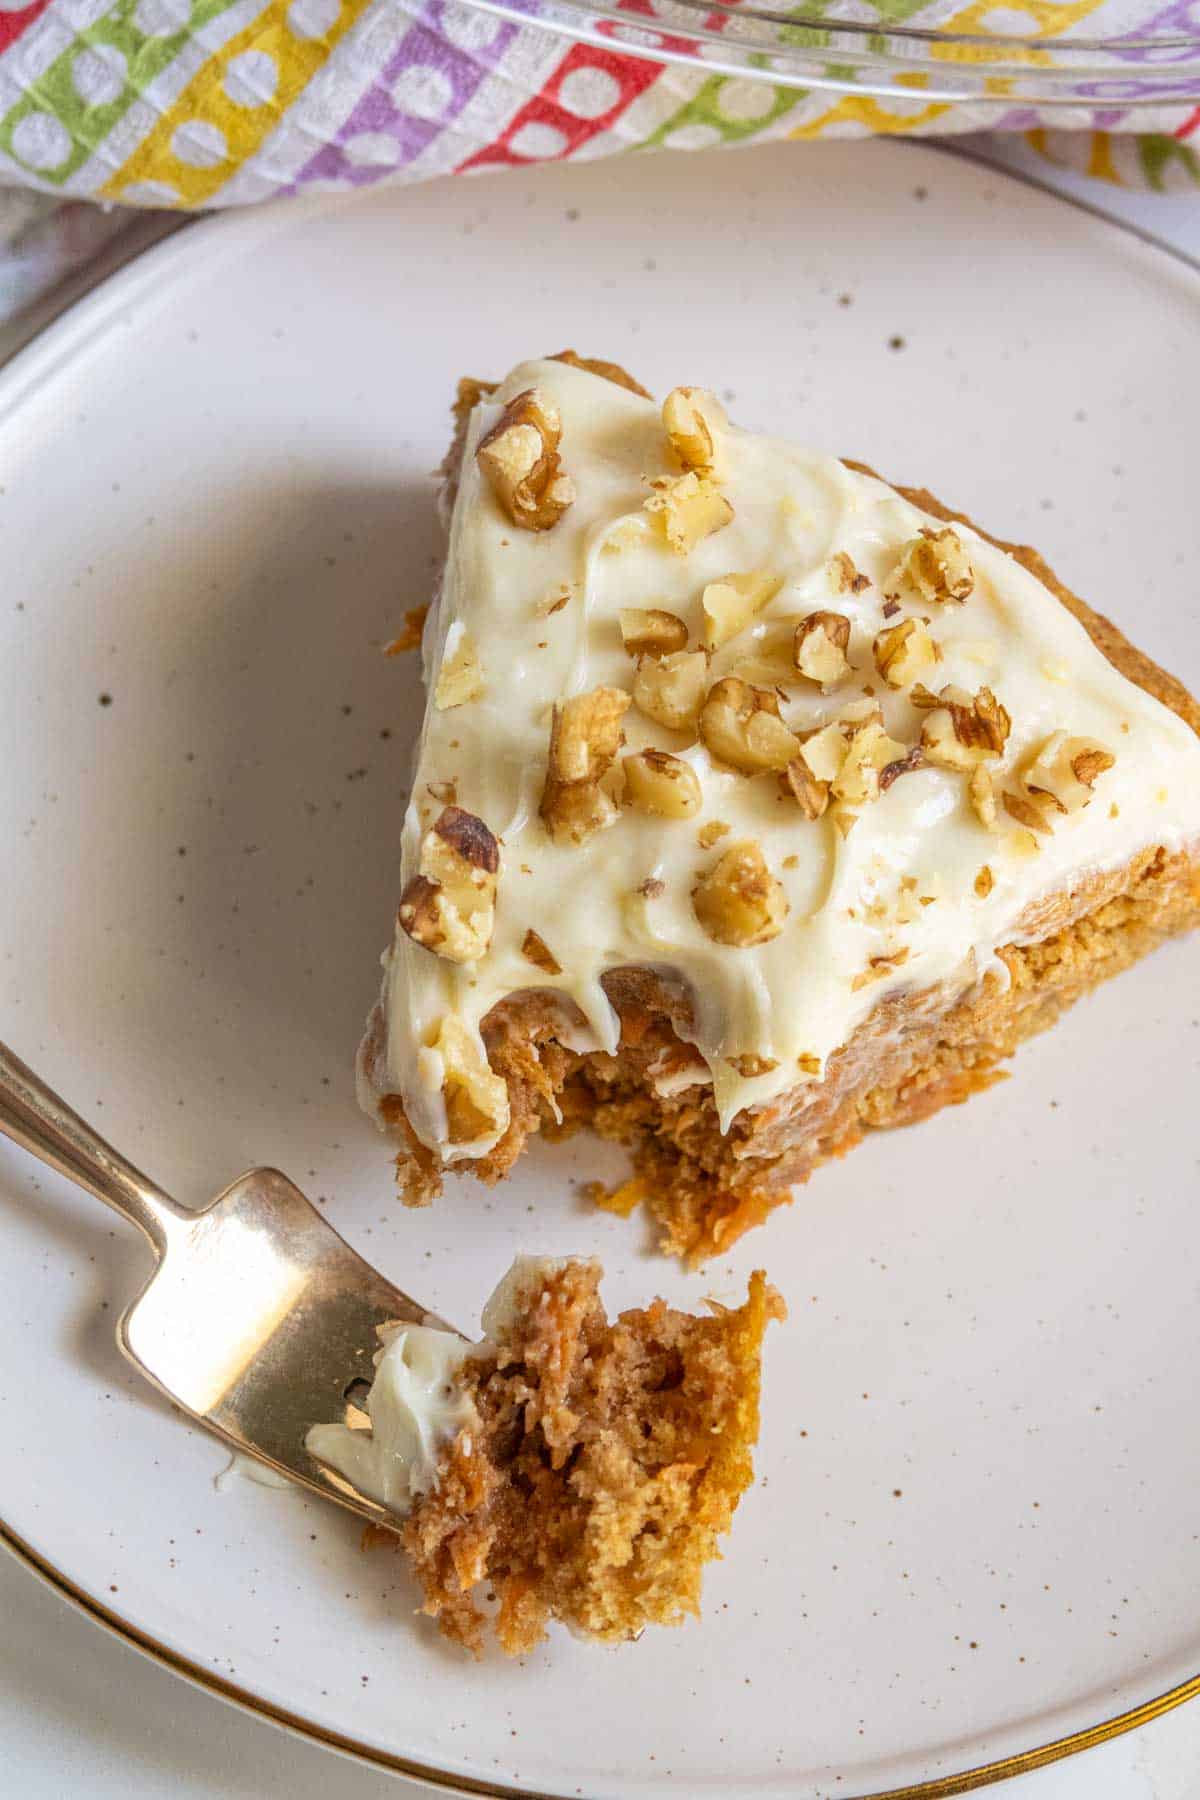 A slice of carrot cake with cream cheese frosting and chopped nuts on a plate with a fork.